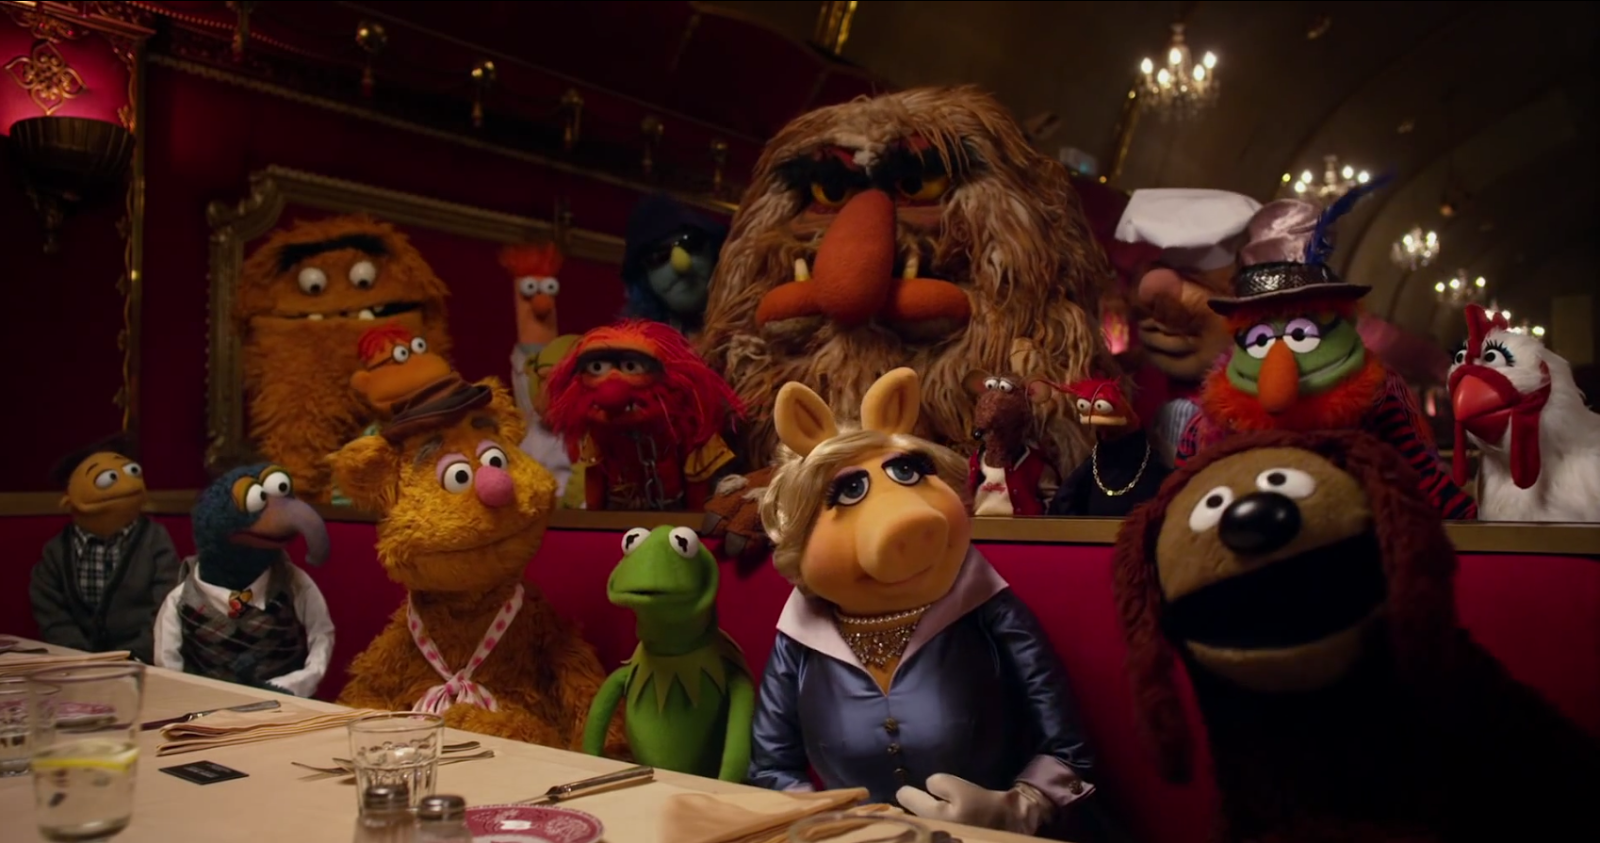 “Muppets Most Wanted” Brings Classic Muppet Humor to Theaters – borg